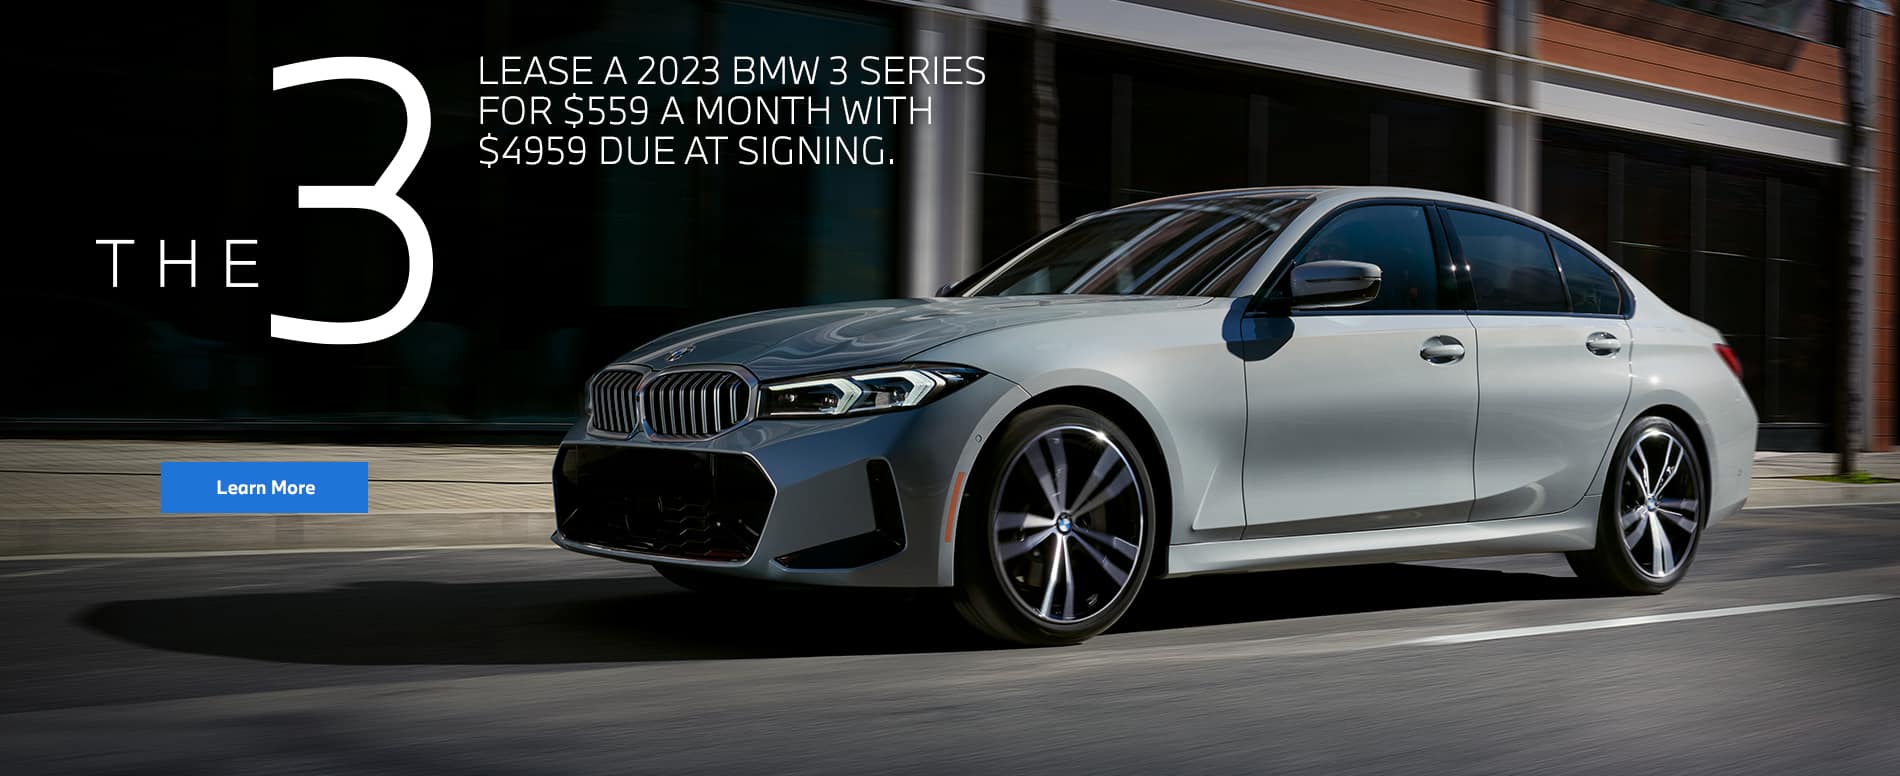 2023 330i xDrive lease starting at $559 per month for 36 months